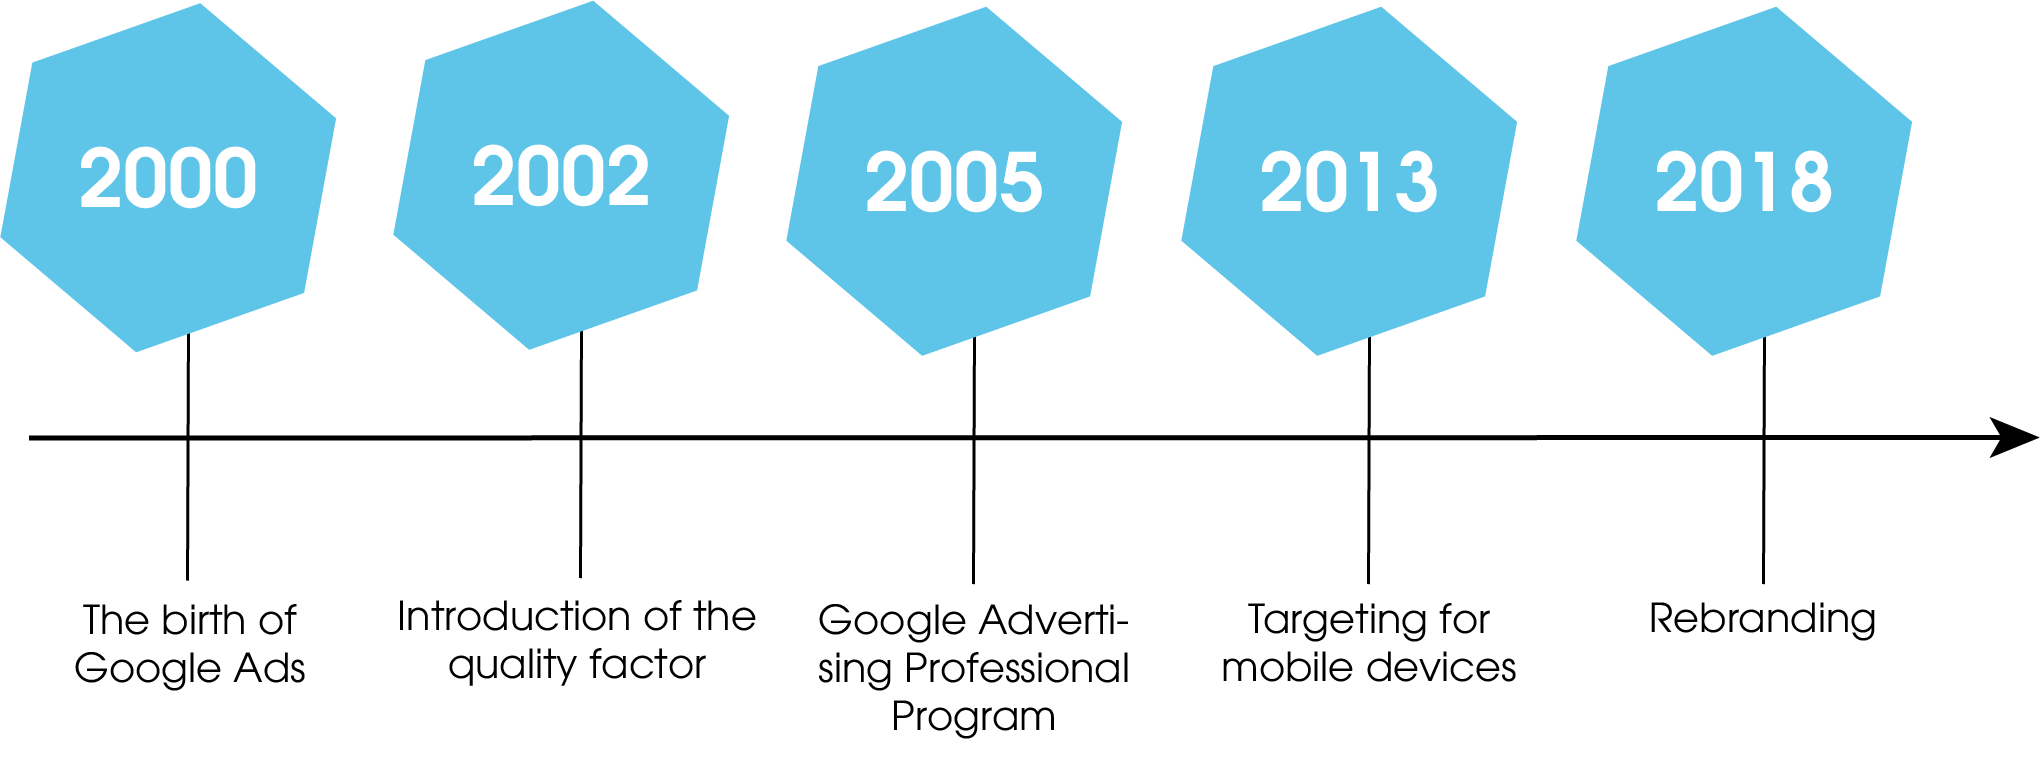 The Google Ads timeline shows the most important dates at a glance:
2000: Foundation of Google Ads
2002: Introduction of the quality factor
2005: Google Advertising Professional Program
2013: Targeting for mobile devices
2018: Rebranding